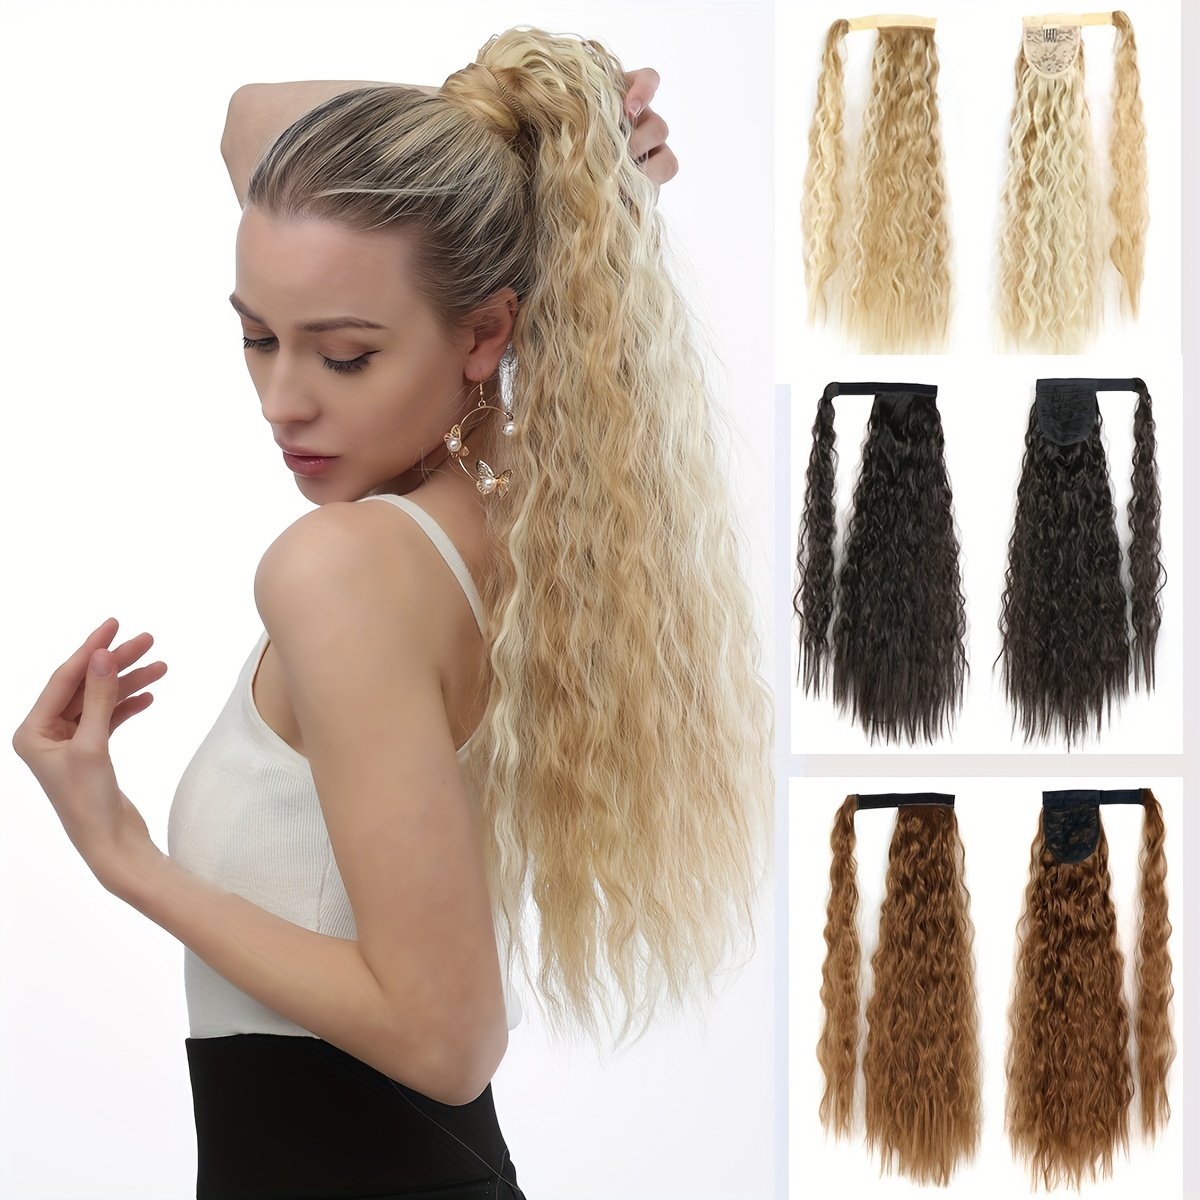 Women Invisible Wire Hair Extensions Hidden No Clip Natural Hair Extensions  Long Soft Silky Straight Curly Hairpiece Wavy Hidden Hair Extension  Synthetic Hairpieces 18-22 inch Hairpiece 